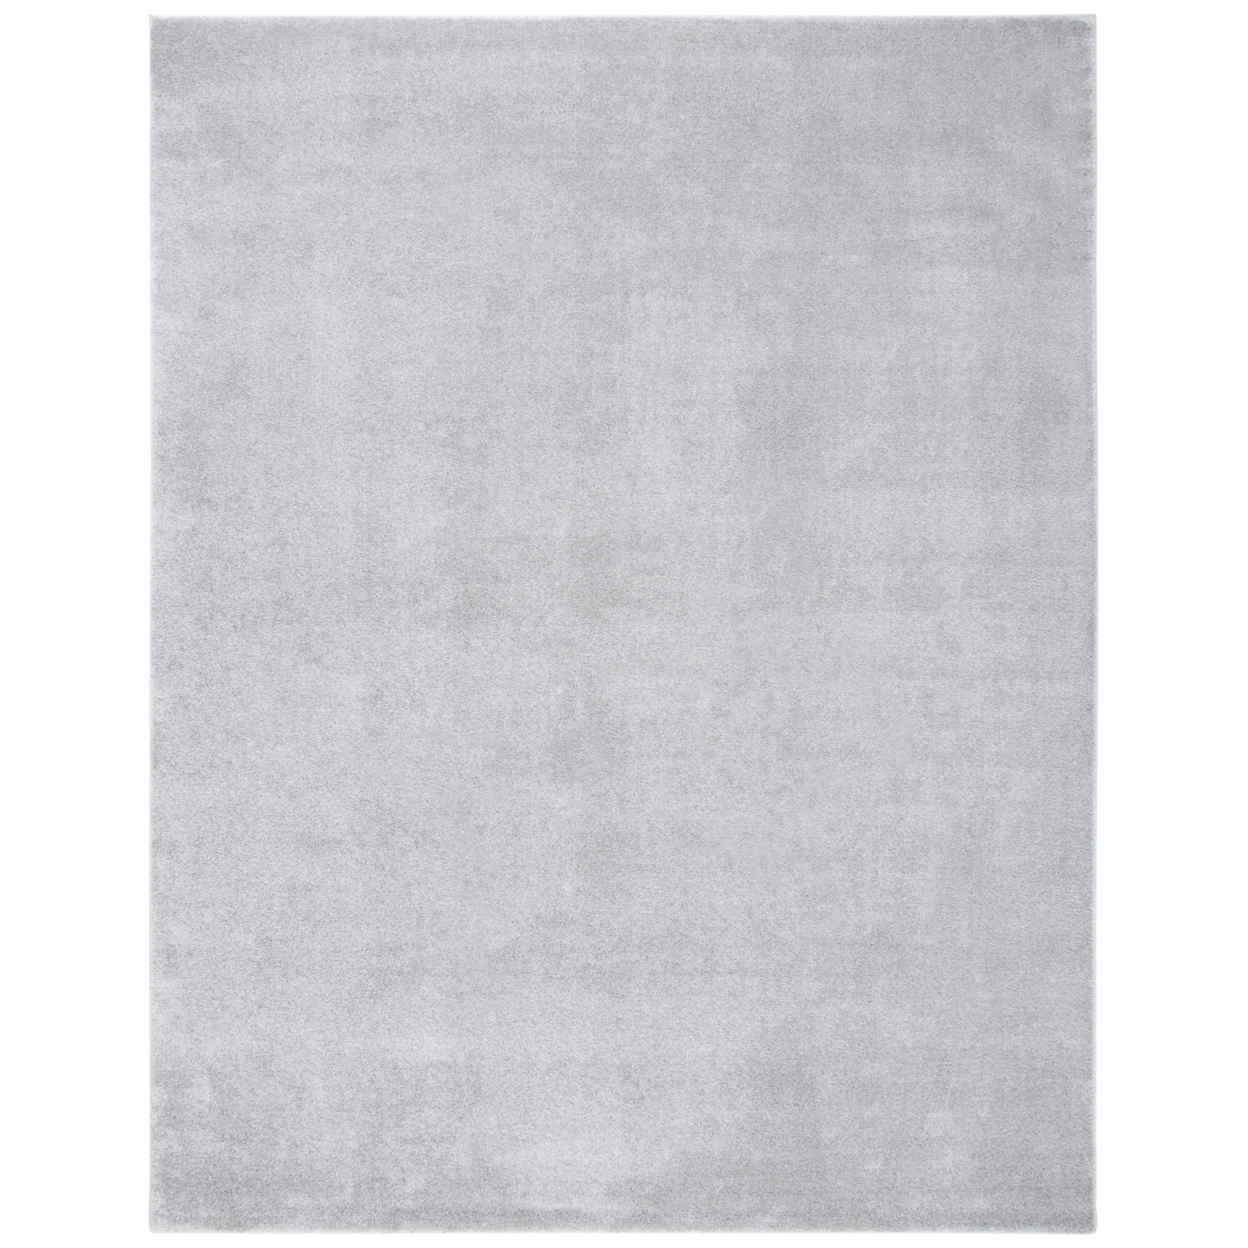 SAFAVIEH Pattern And Solid PNS320-4424 Light Grey Rug - 8' X 10'